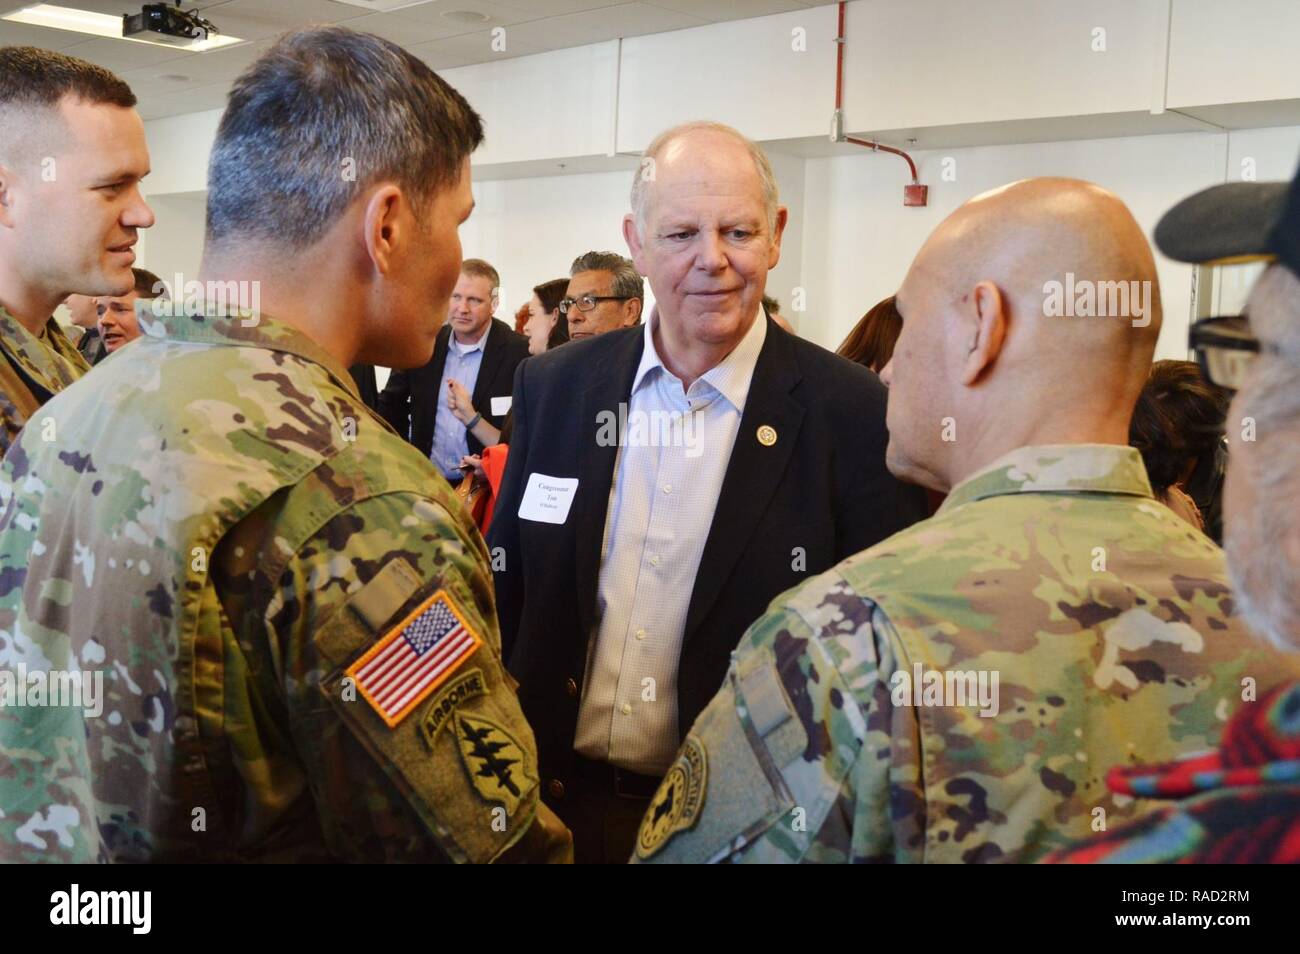 Capt. Adam McGinnis (far left), commander, Phoenix Central Company, Lt. Col. David Clukey (second left), battalion commander, Phoenix Recruiting Battalion, and Command Sgt. Maj. Jose Gomez (right), command sergeant major, Phoenix Rec. Bn. talk with Congressman Tom O' Halleran (center), 1st Congressional District of Arizona, prior to a ceremony at the Phoenix Downtown Post Office, Jan. 27.    The event provided an opportunity for the leadership to expand their relationships with members of the local community, which also included Congressman Ruben Gallego, 7th District of Arizona , and Democrat Stock Photo